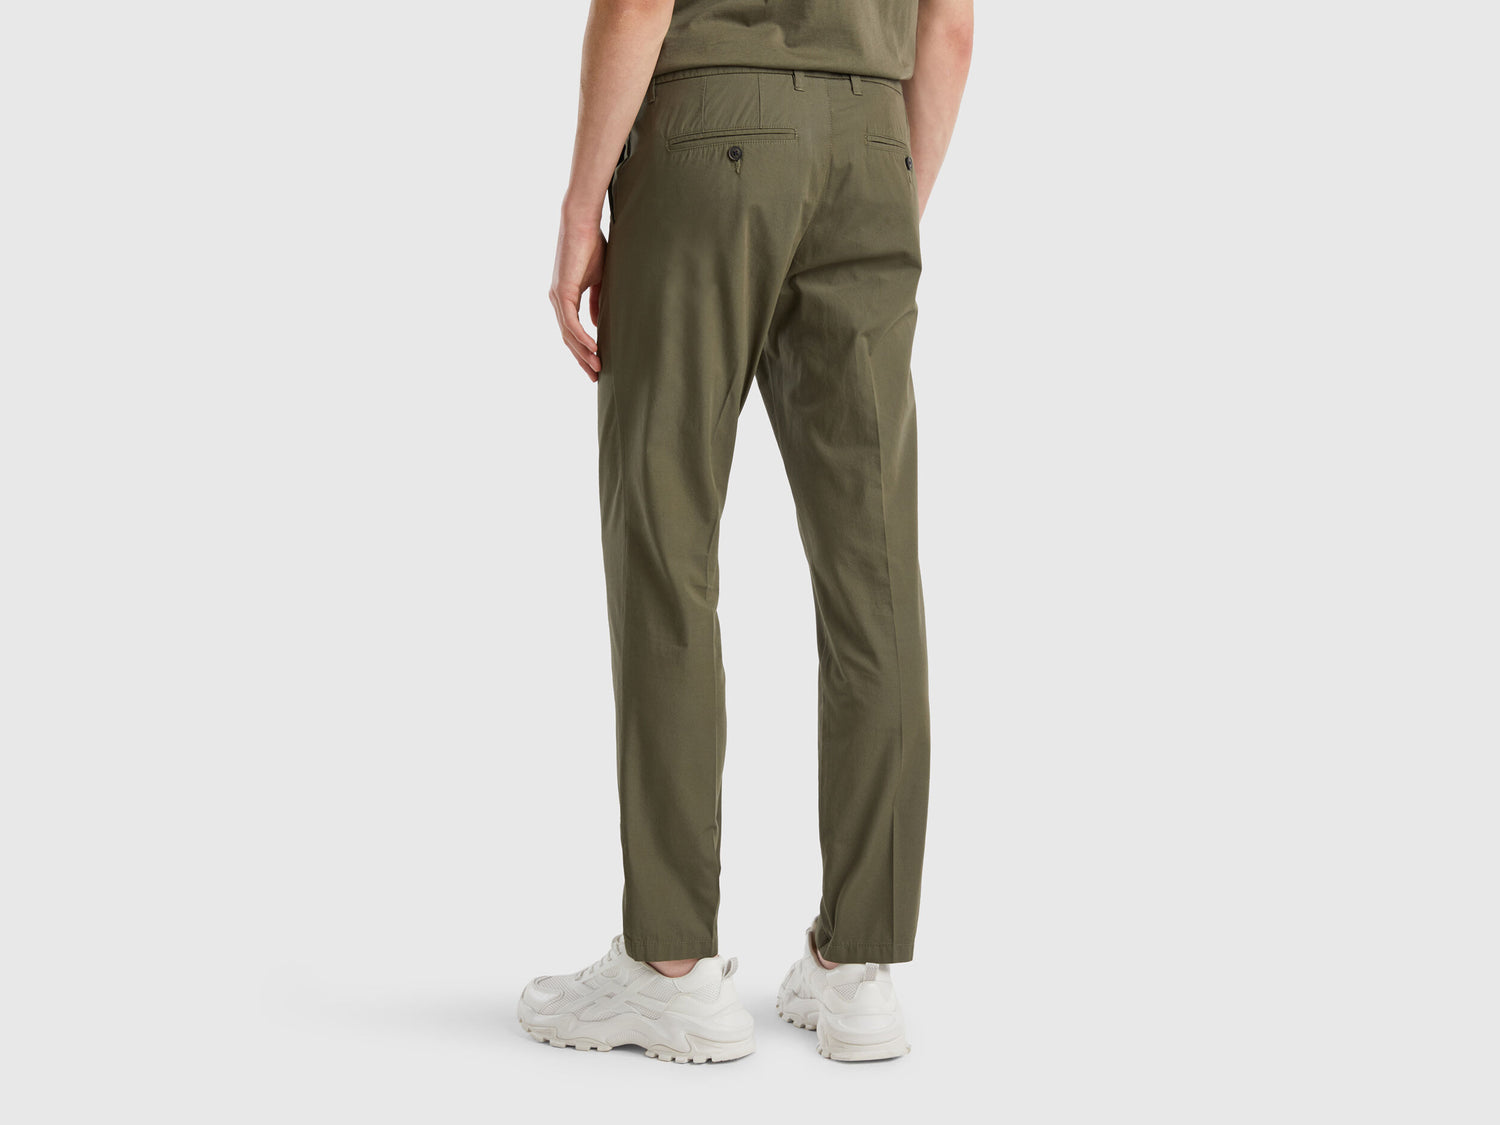 Slim Fit Chinos In Light Cotton